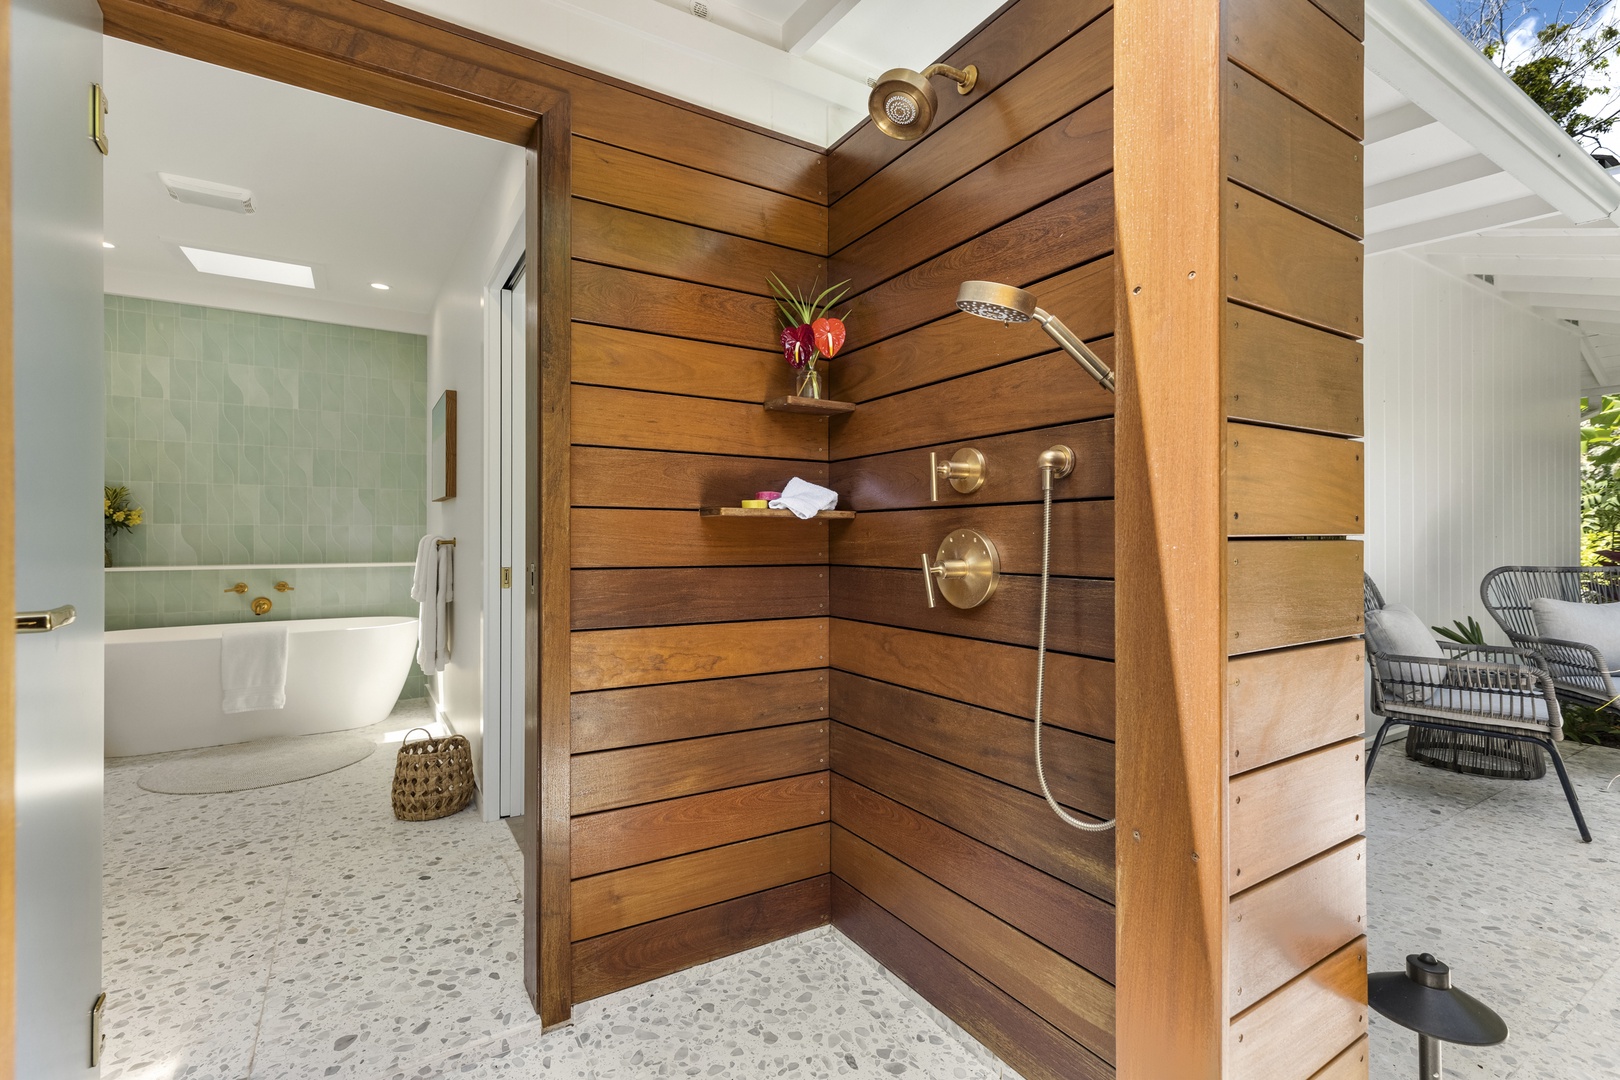 Kailua Vacation Rentals, Lanikai Hideaway - Primary ensuite with IPE lined shower